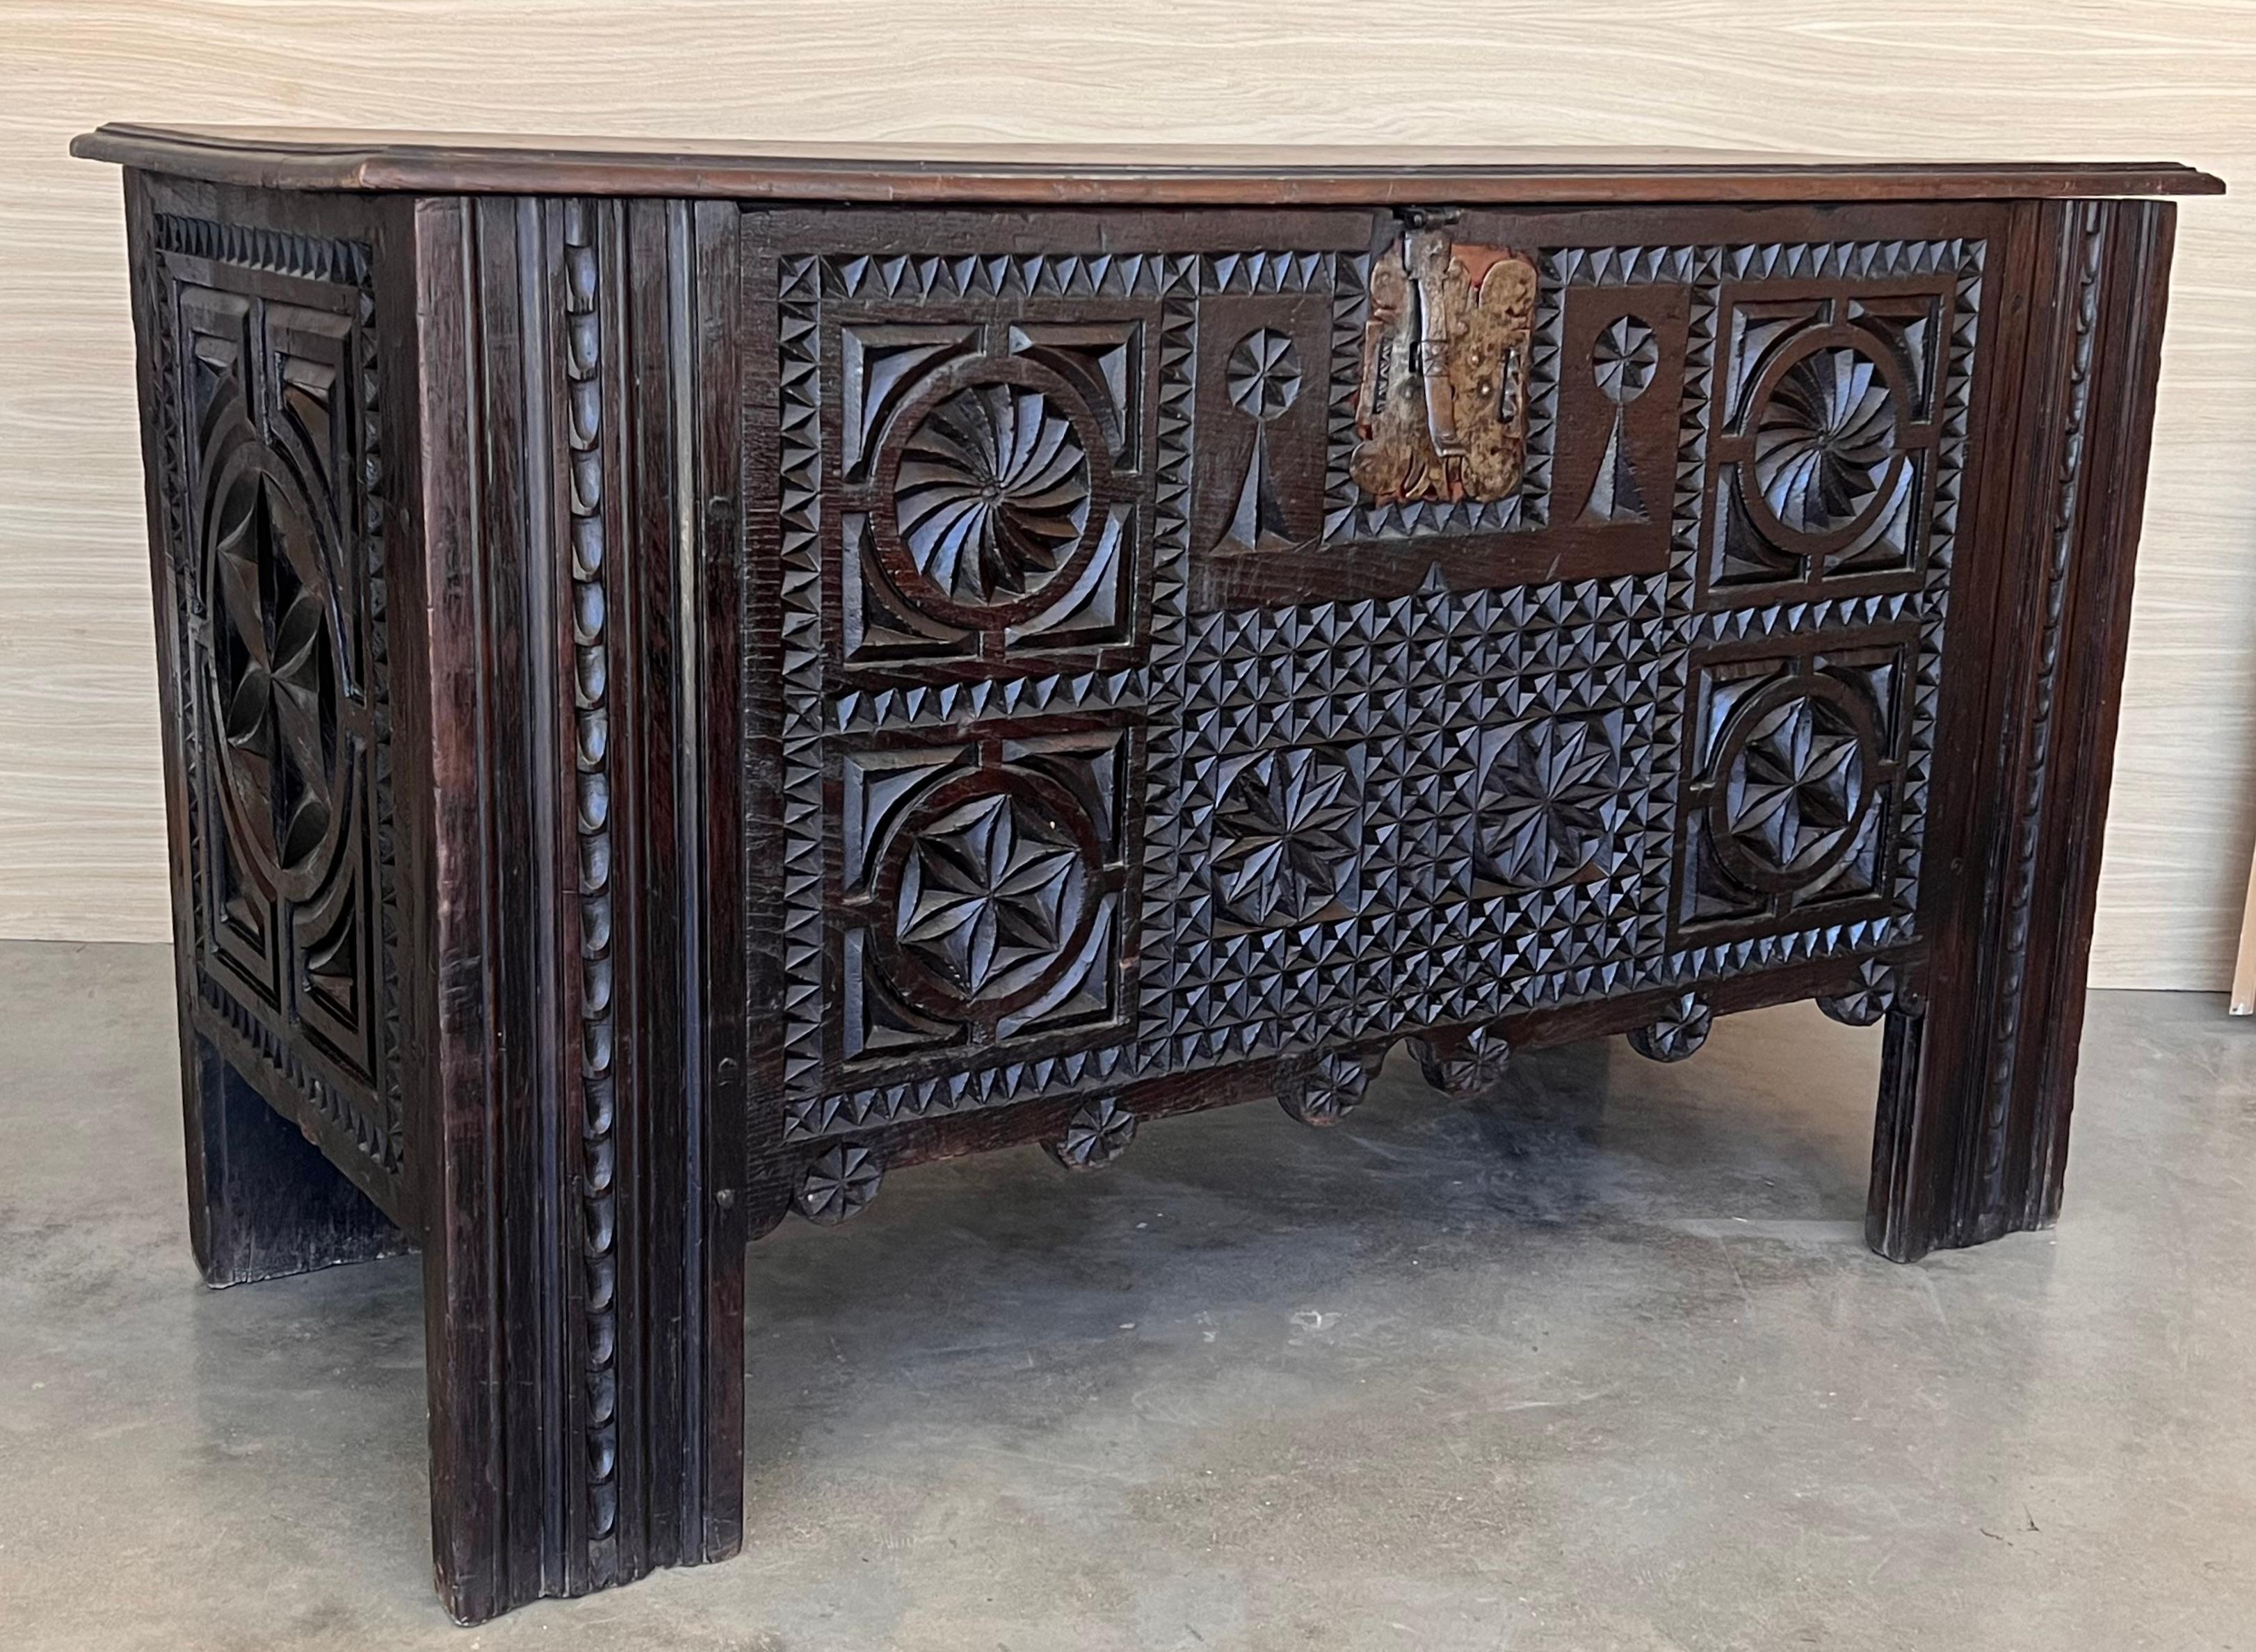 19th Century Antique Carved Walnut Large Kutxa Trunk from the Basque Country, Early 1800s For Sale